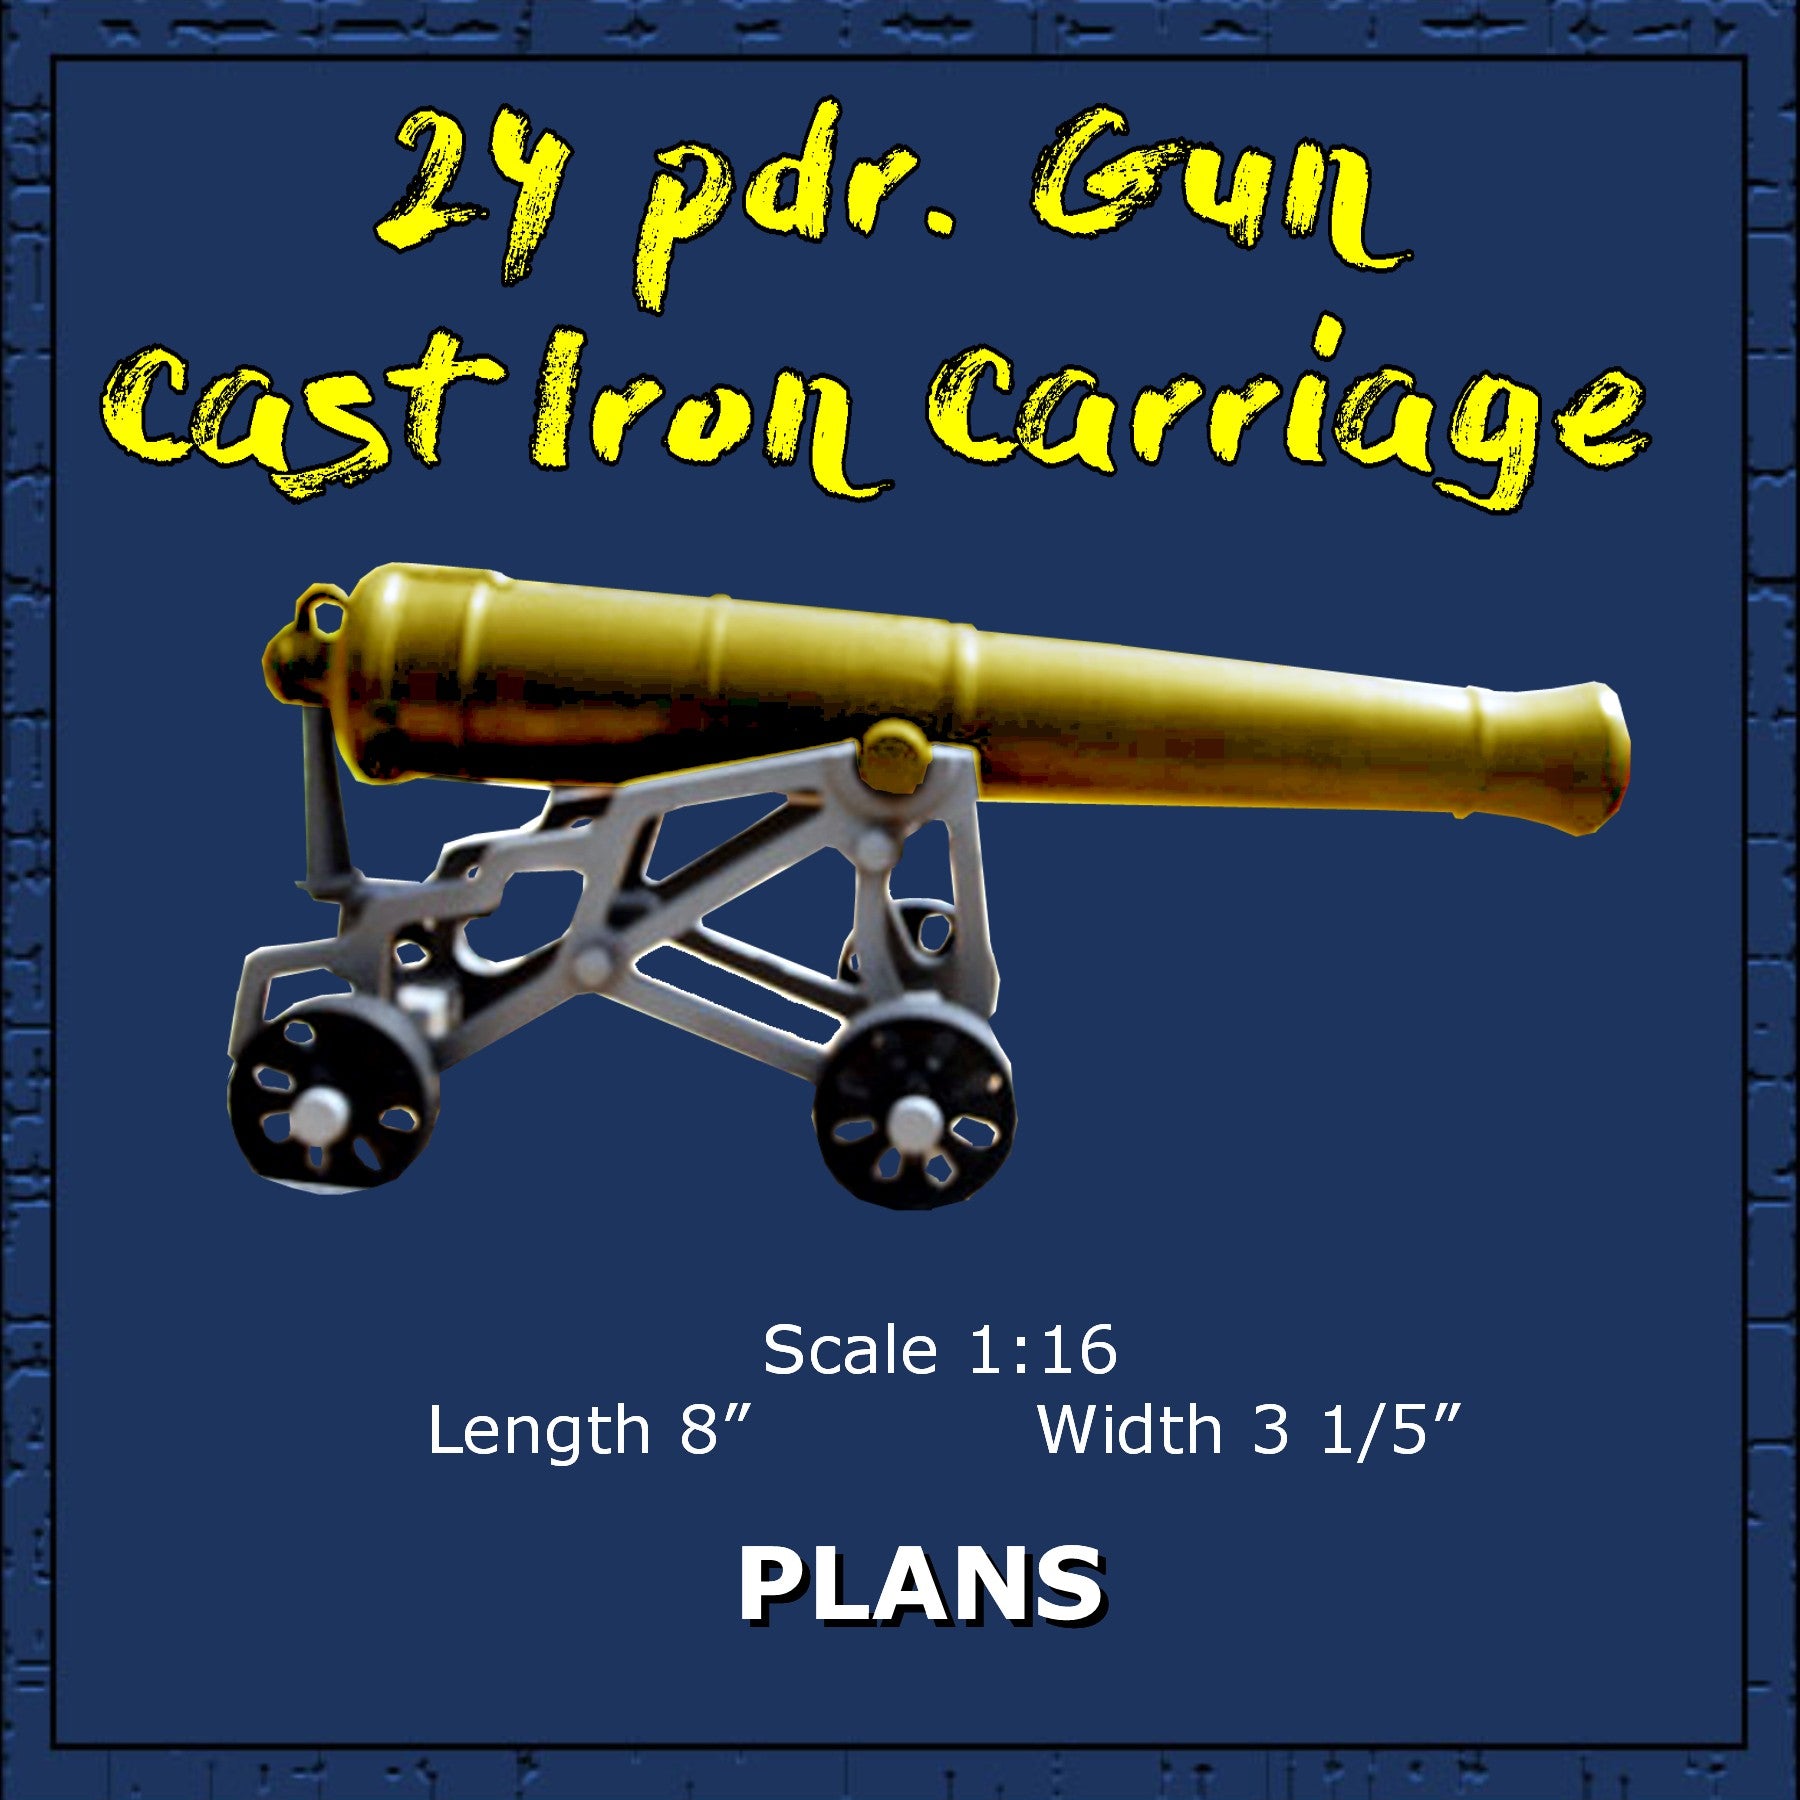 full size printed plans and article scale 1:16  24 pdr. gun with cast iron carriage